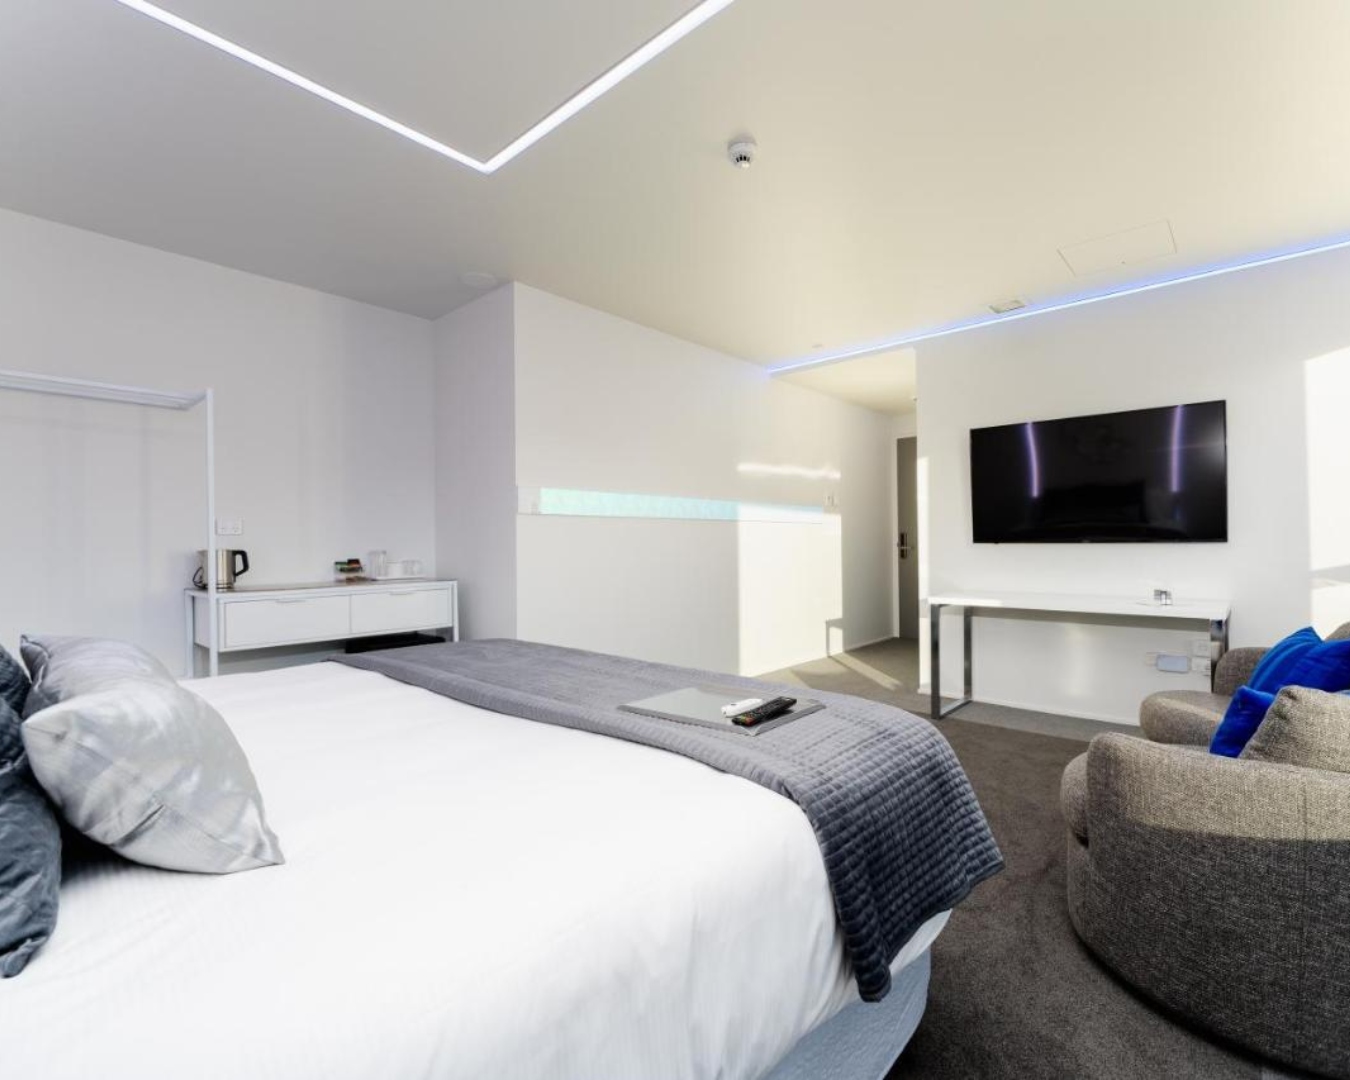 A clean neo-futuristic white apartment bedroom with a large bed, circular seats, a TV mounted on the wall and neon strip lighting on the ceiling.